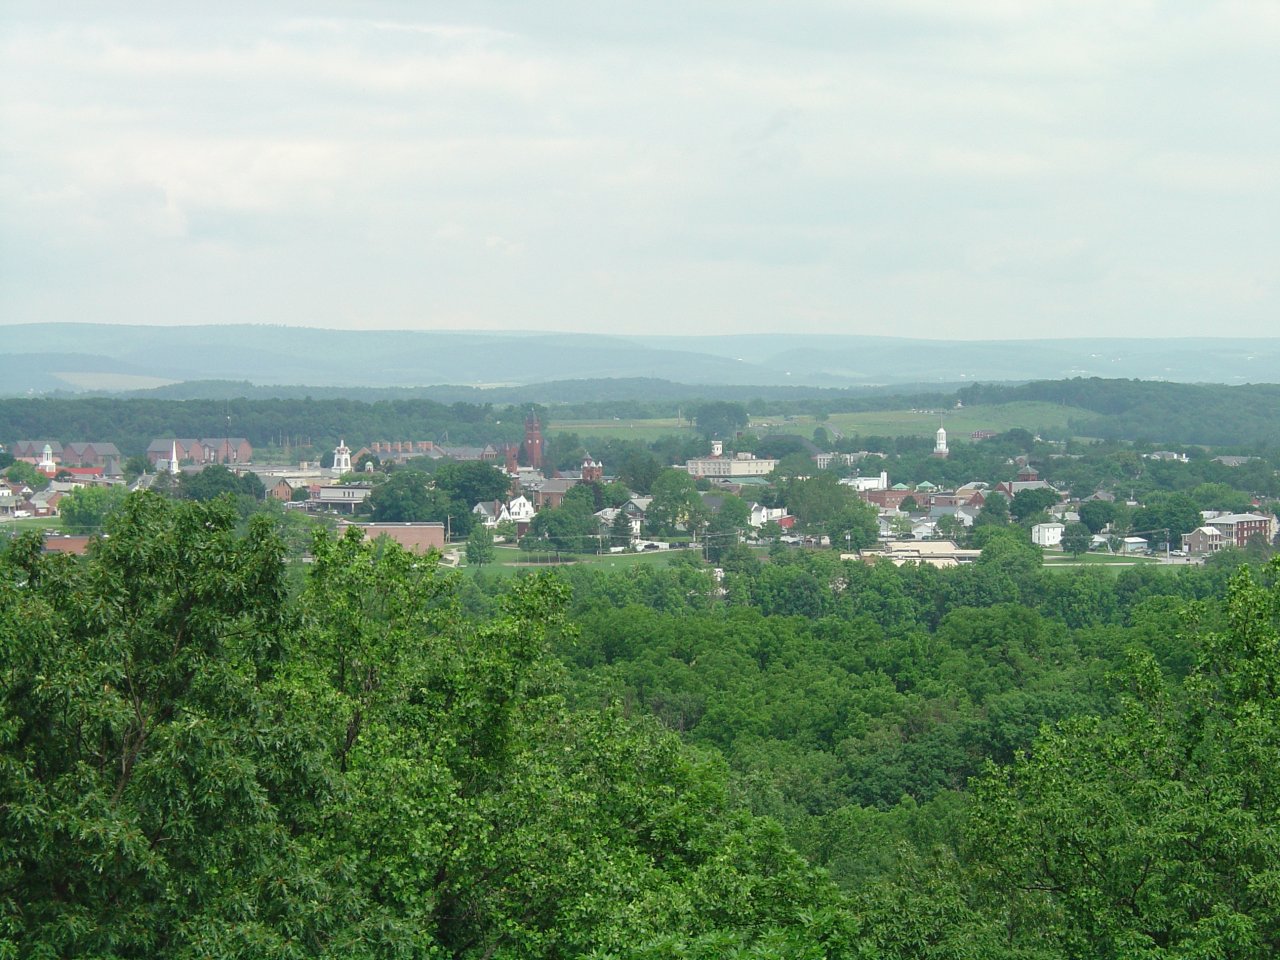 View from Tower at Culp's Hill